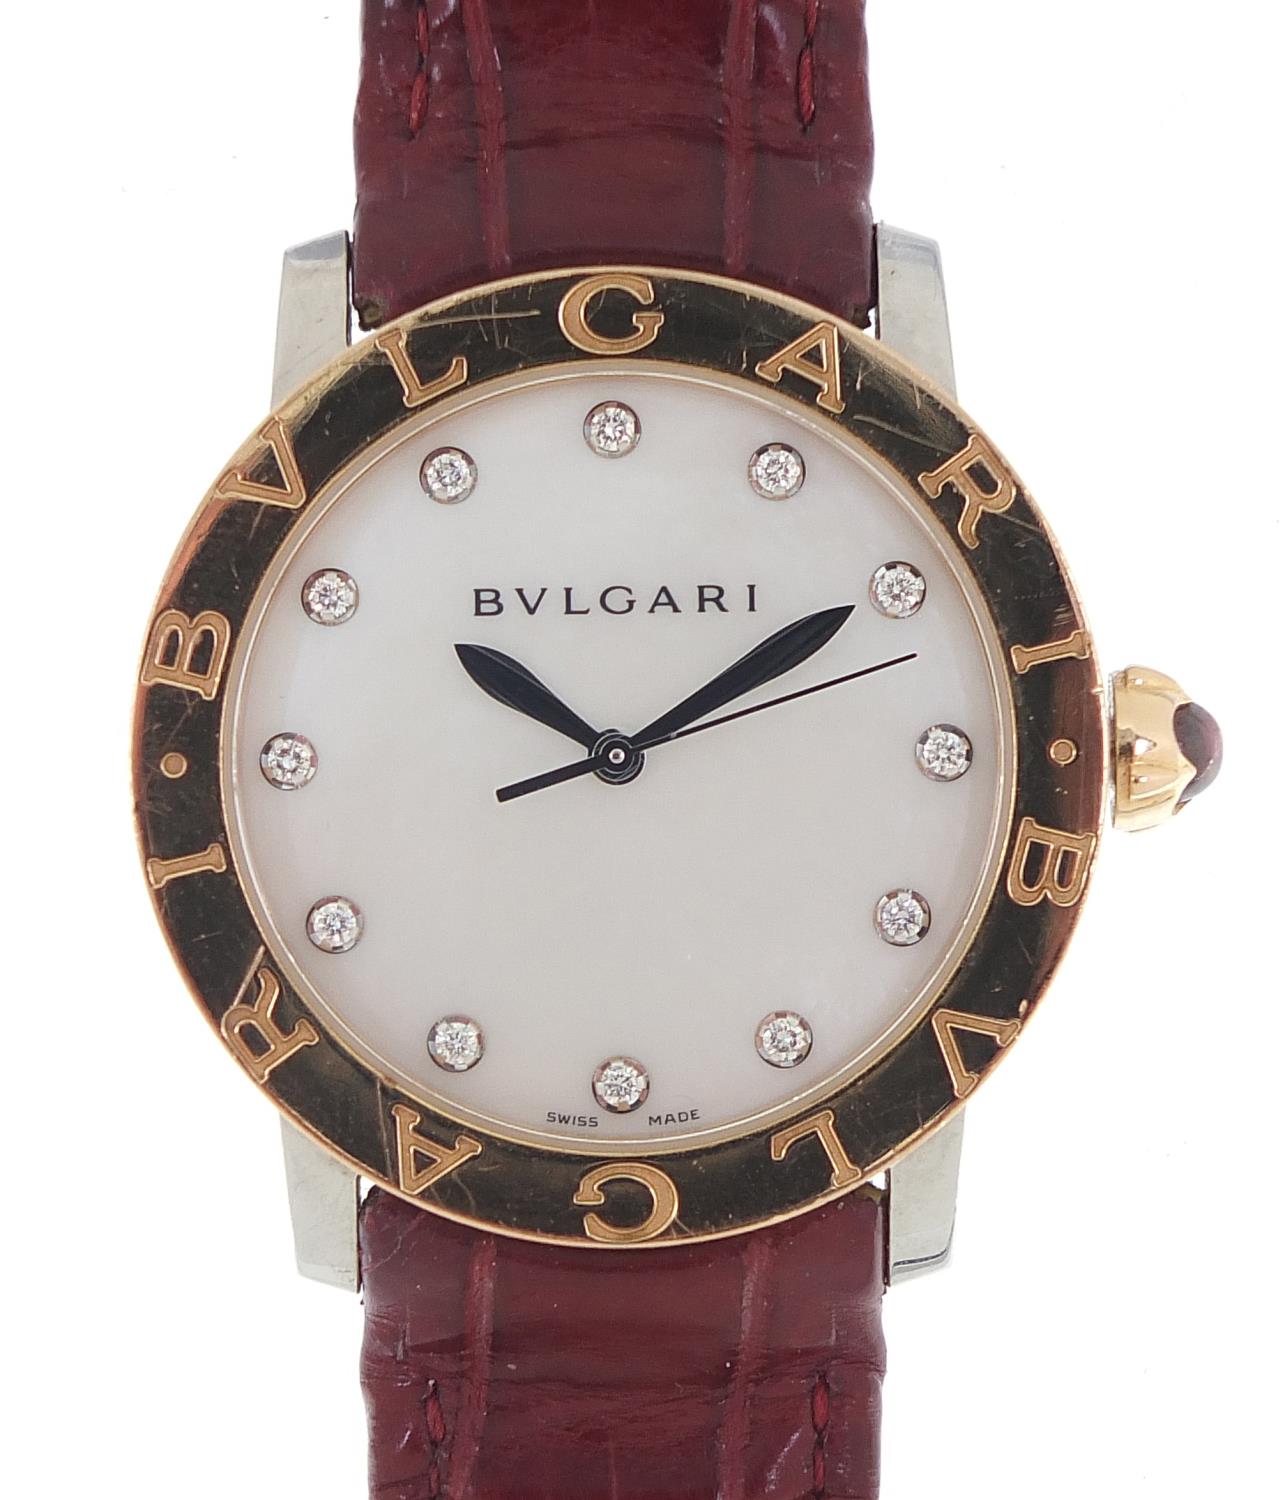 Bvlgari, 18ct gold automatic ladies wristwatch with diamond set mother of pearl dial and cabochon - Image 2 of 11